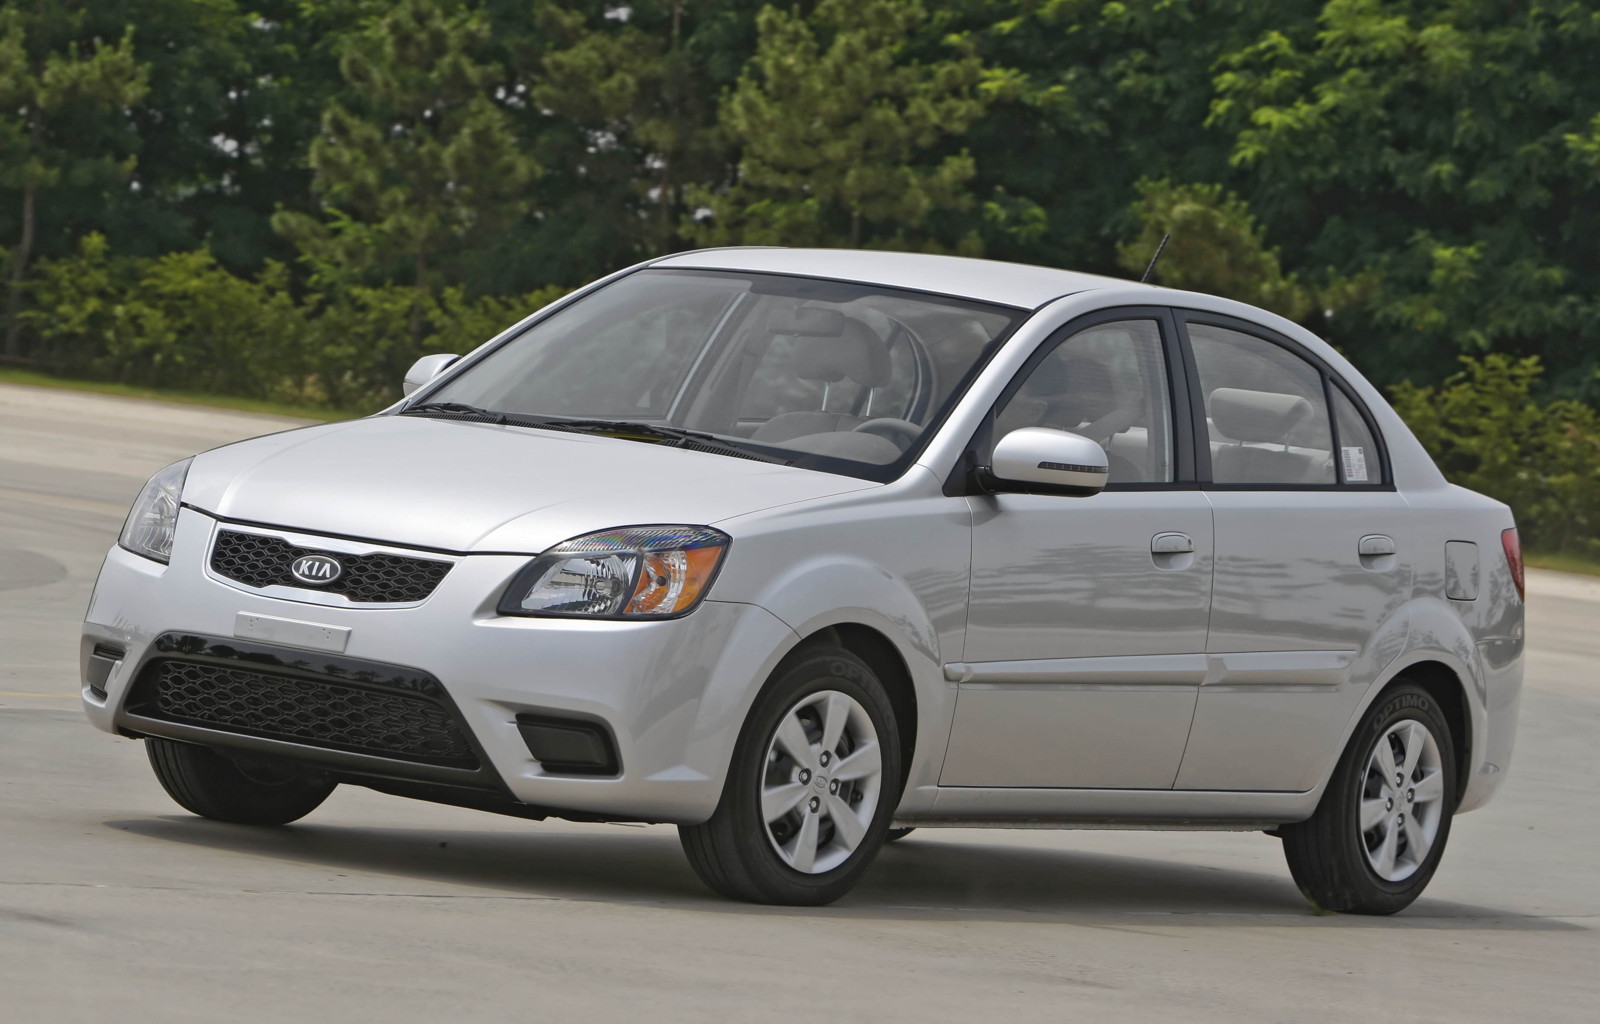 2010 Kia Rio Review, Ratings, Specs, Prices, and Photos - The Car Connection